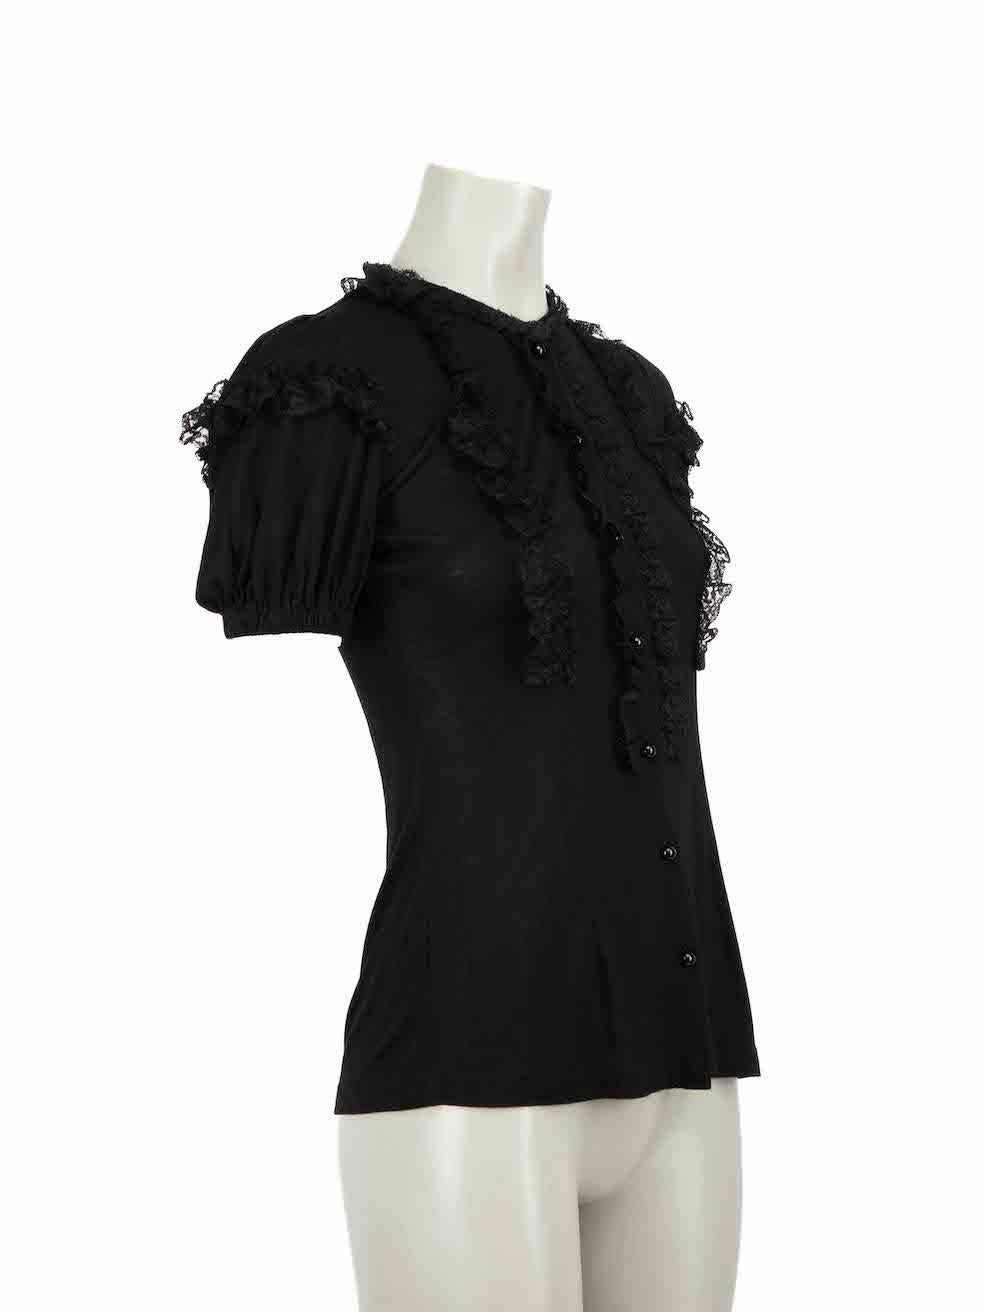 CONDITION is Very good. Hardly any visible wear to top is evident on this used Dolce & Gabbana designer resale item.
 
Details
Black
Viscose
Puff sleeves blouse
Stretchy
Front button up closure
Lace ruffle trim accent
 
Made in Romania
